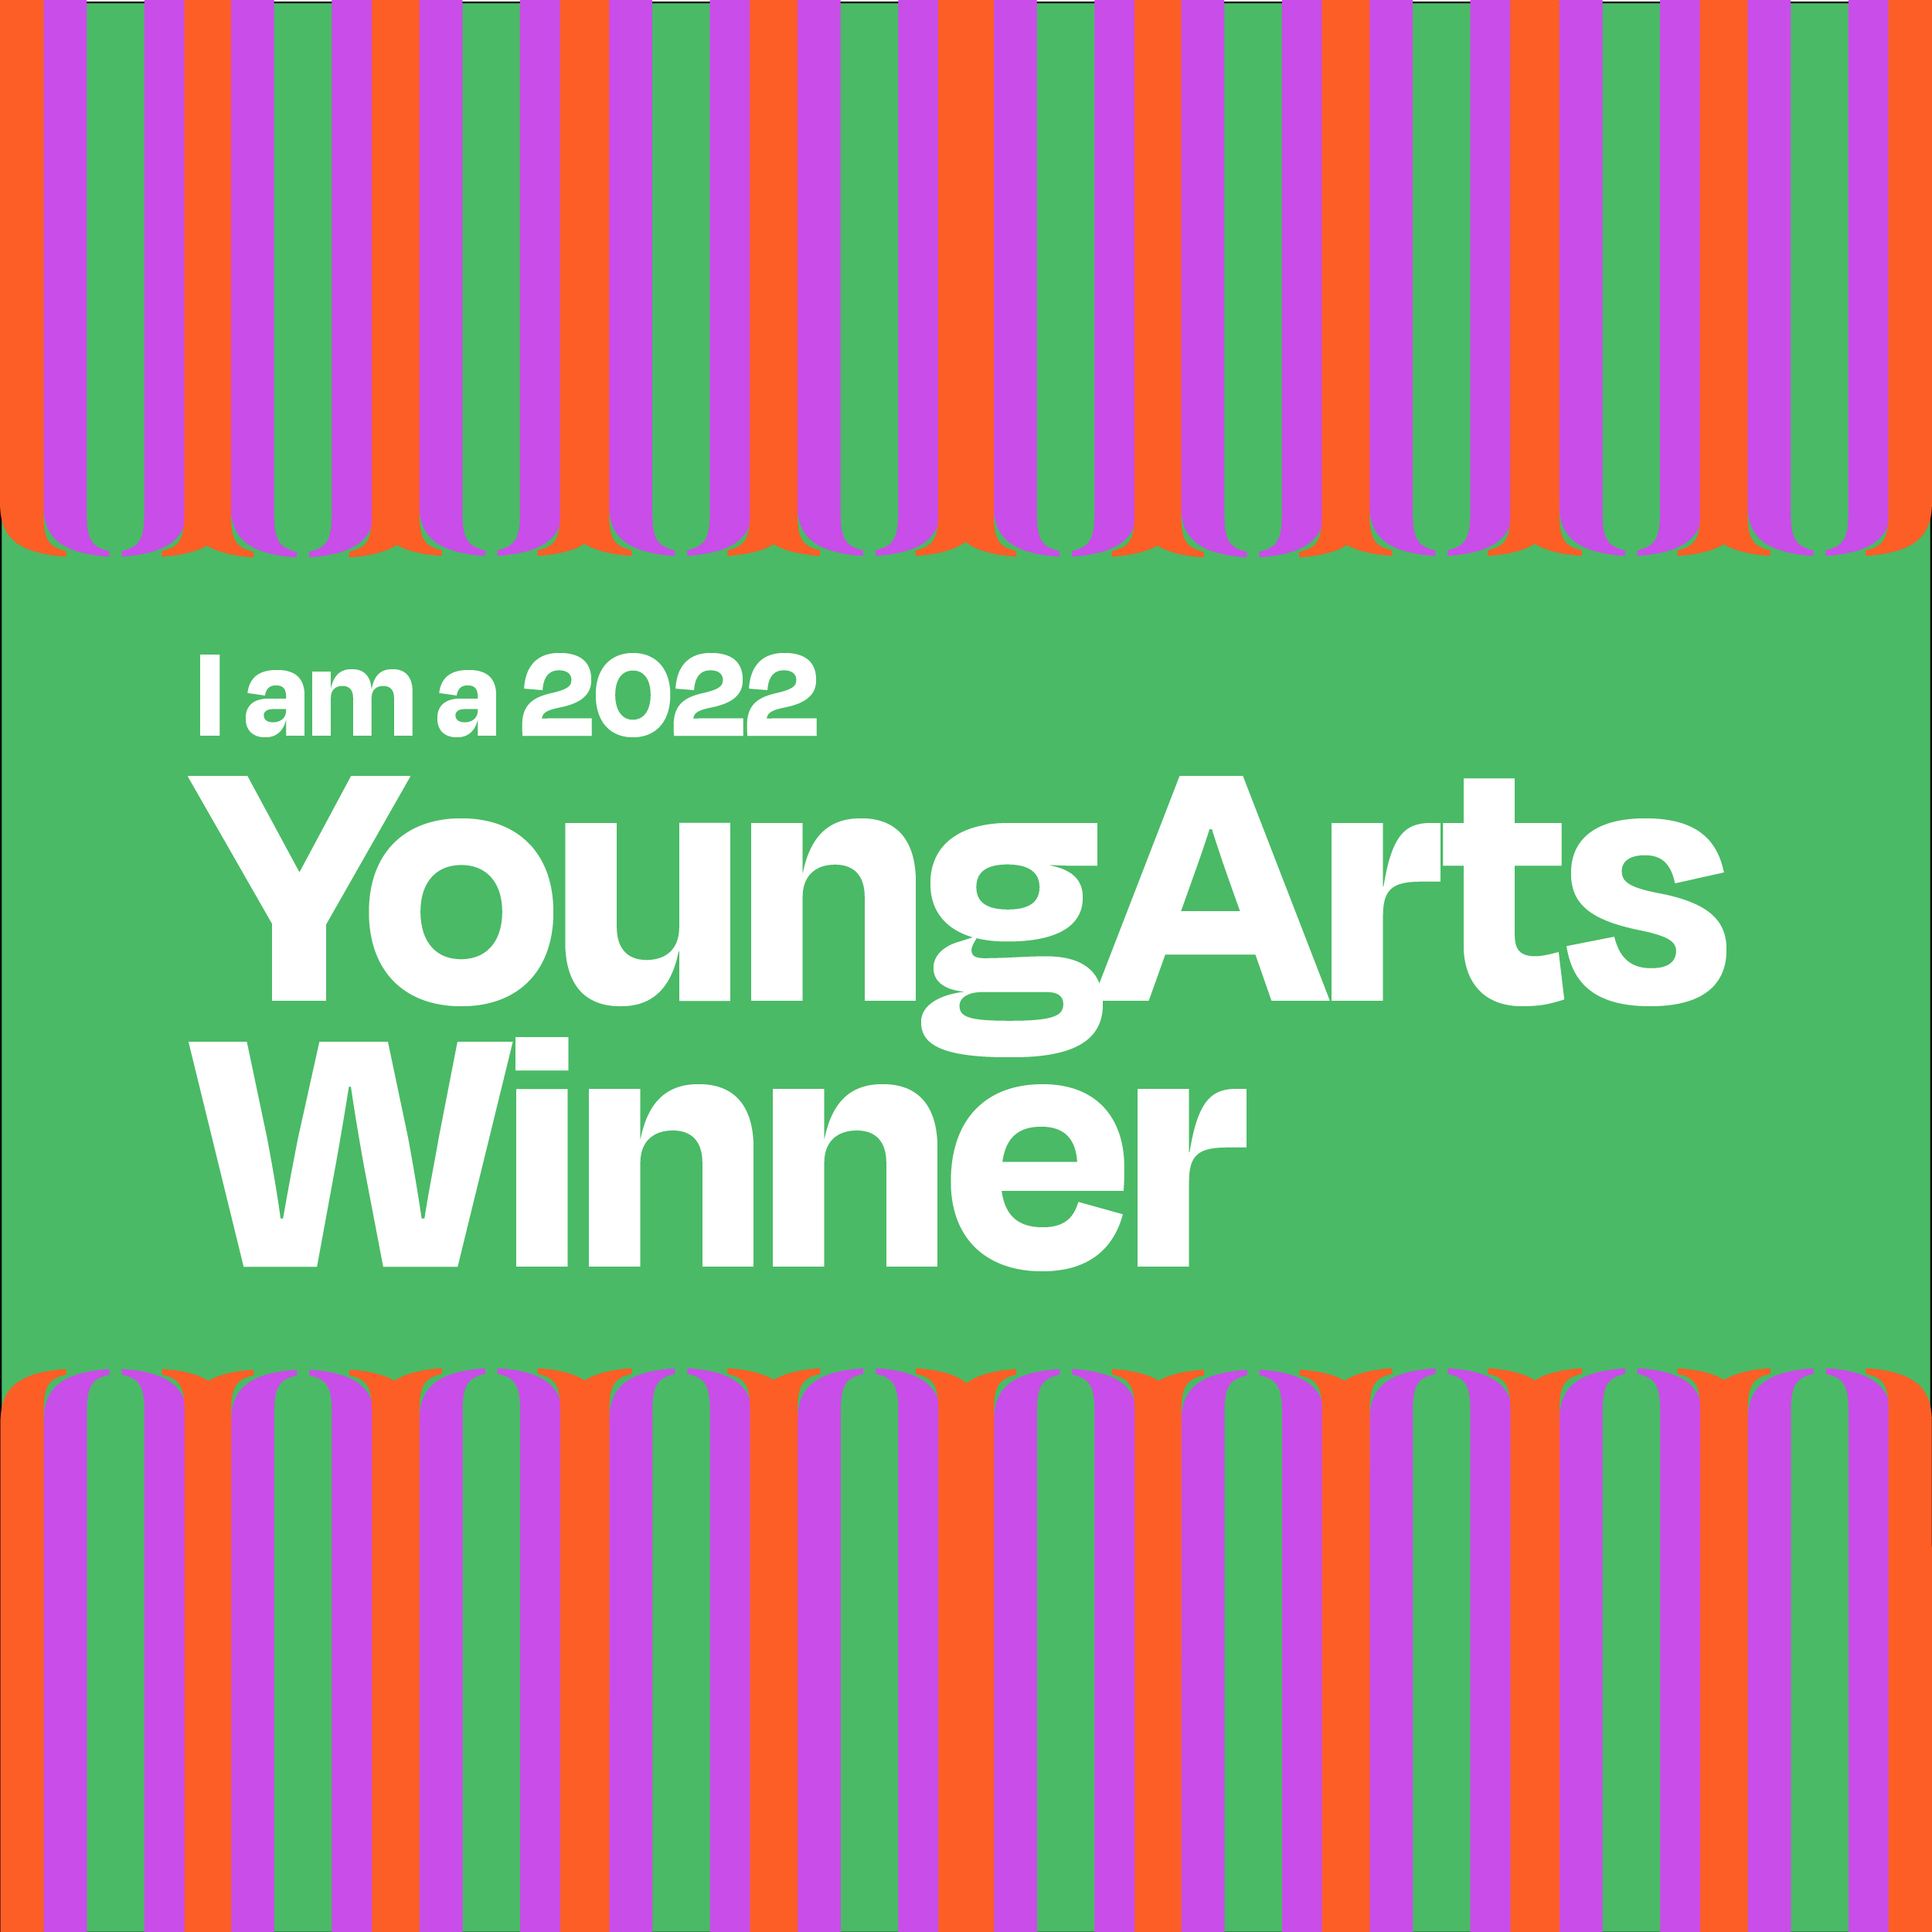 Lilith Max: YoungArts Winner 2022